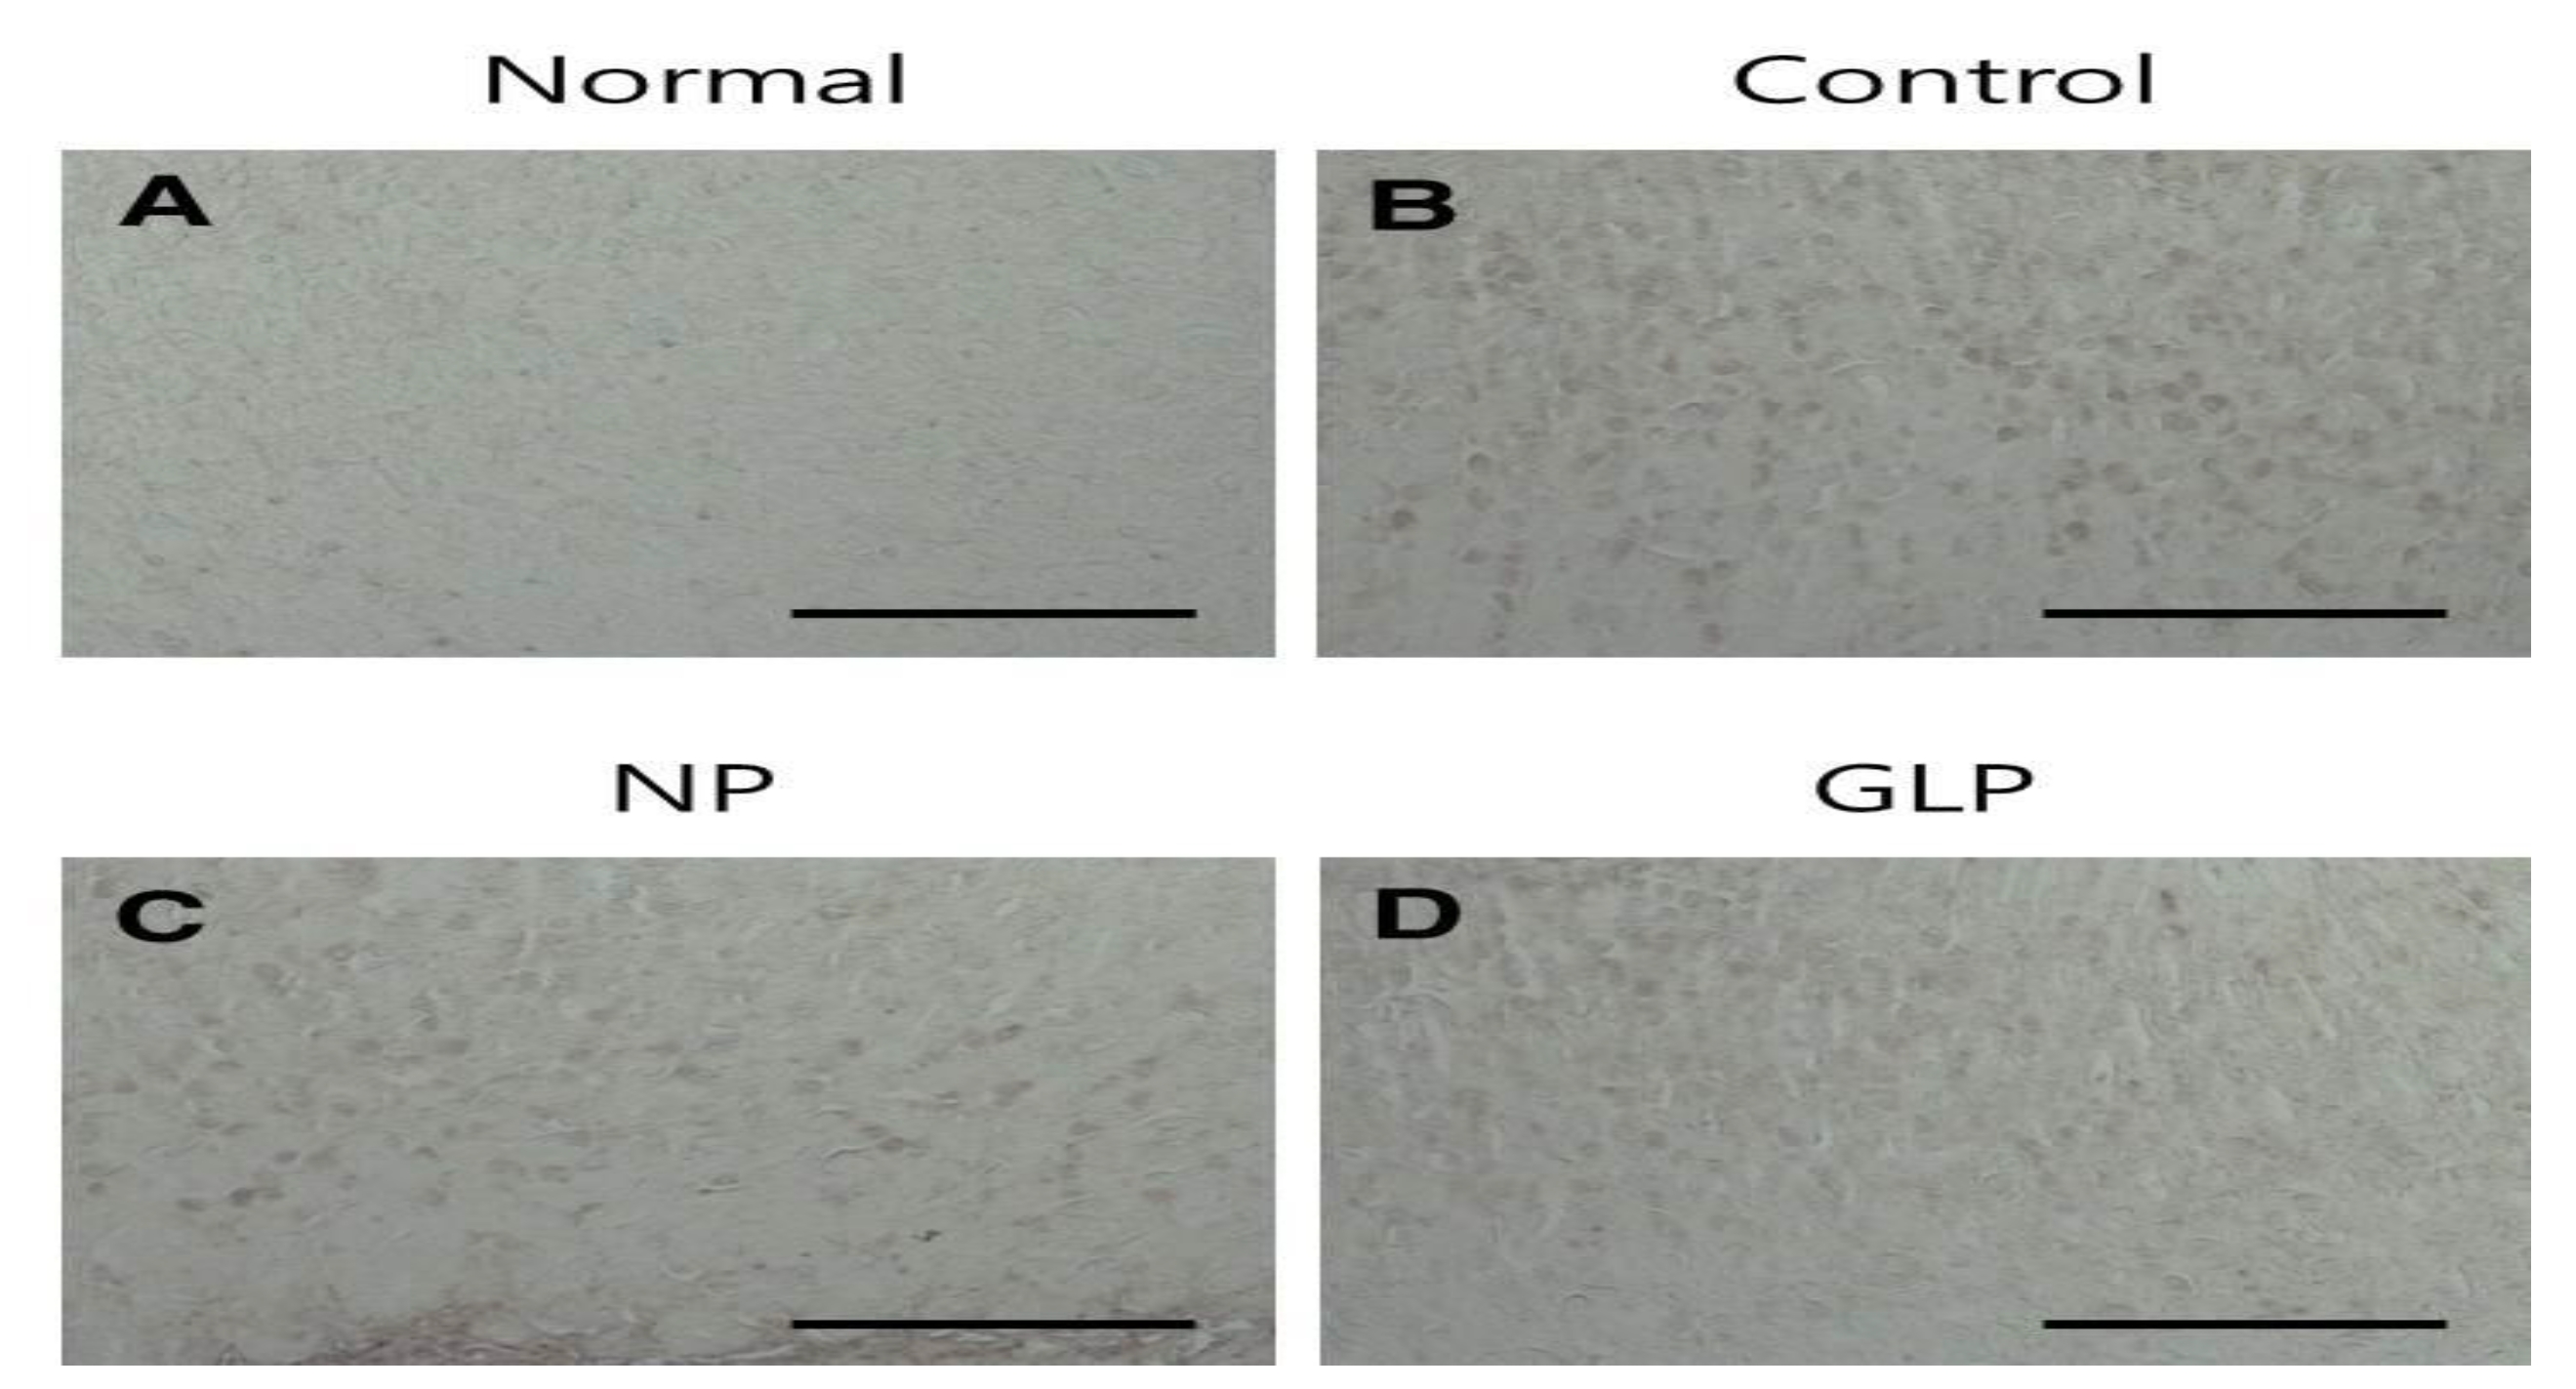 Immunohistochemical staining of BAX proteins in EtOH-induced chronic gastric ulcers in rats.